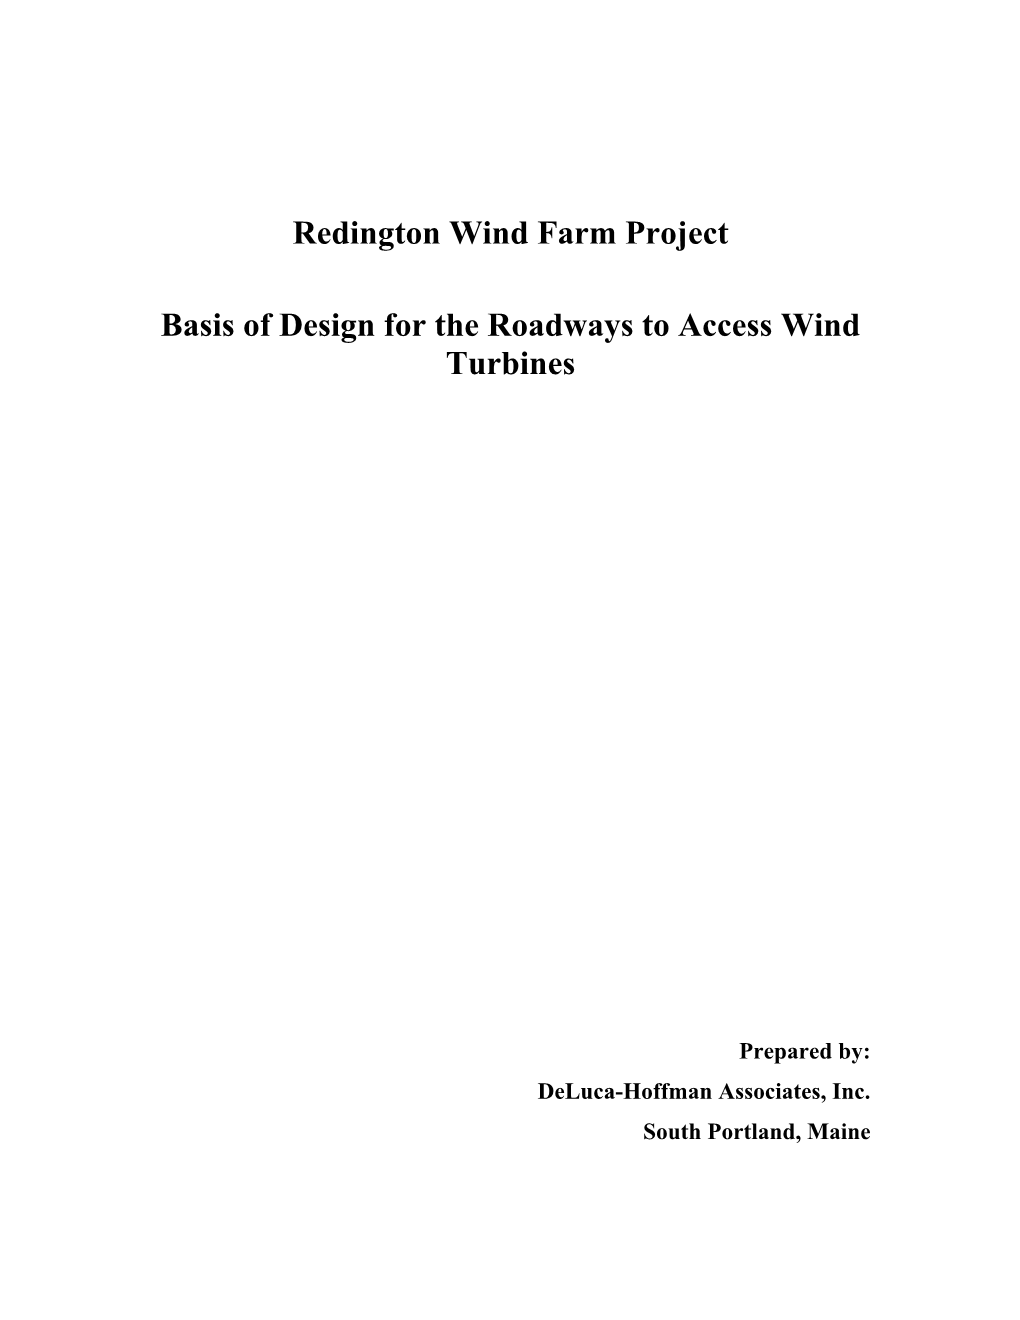 Redington Wind Farm Project Basis of Design for the Roadways to Access